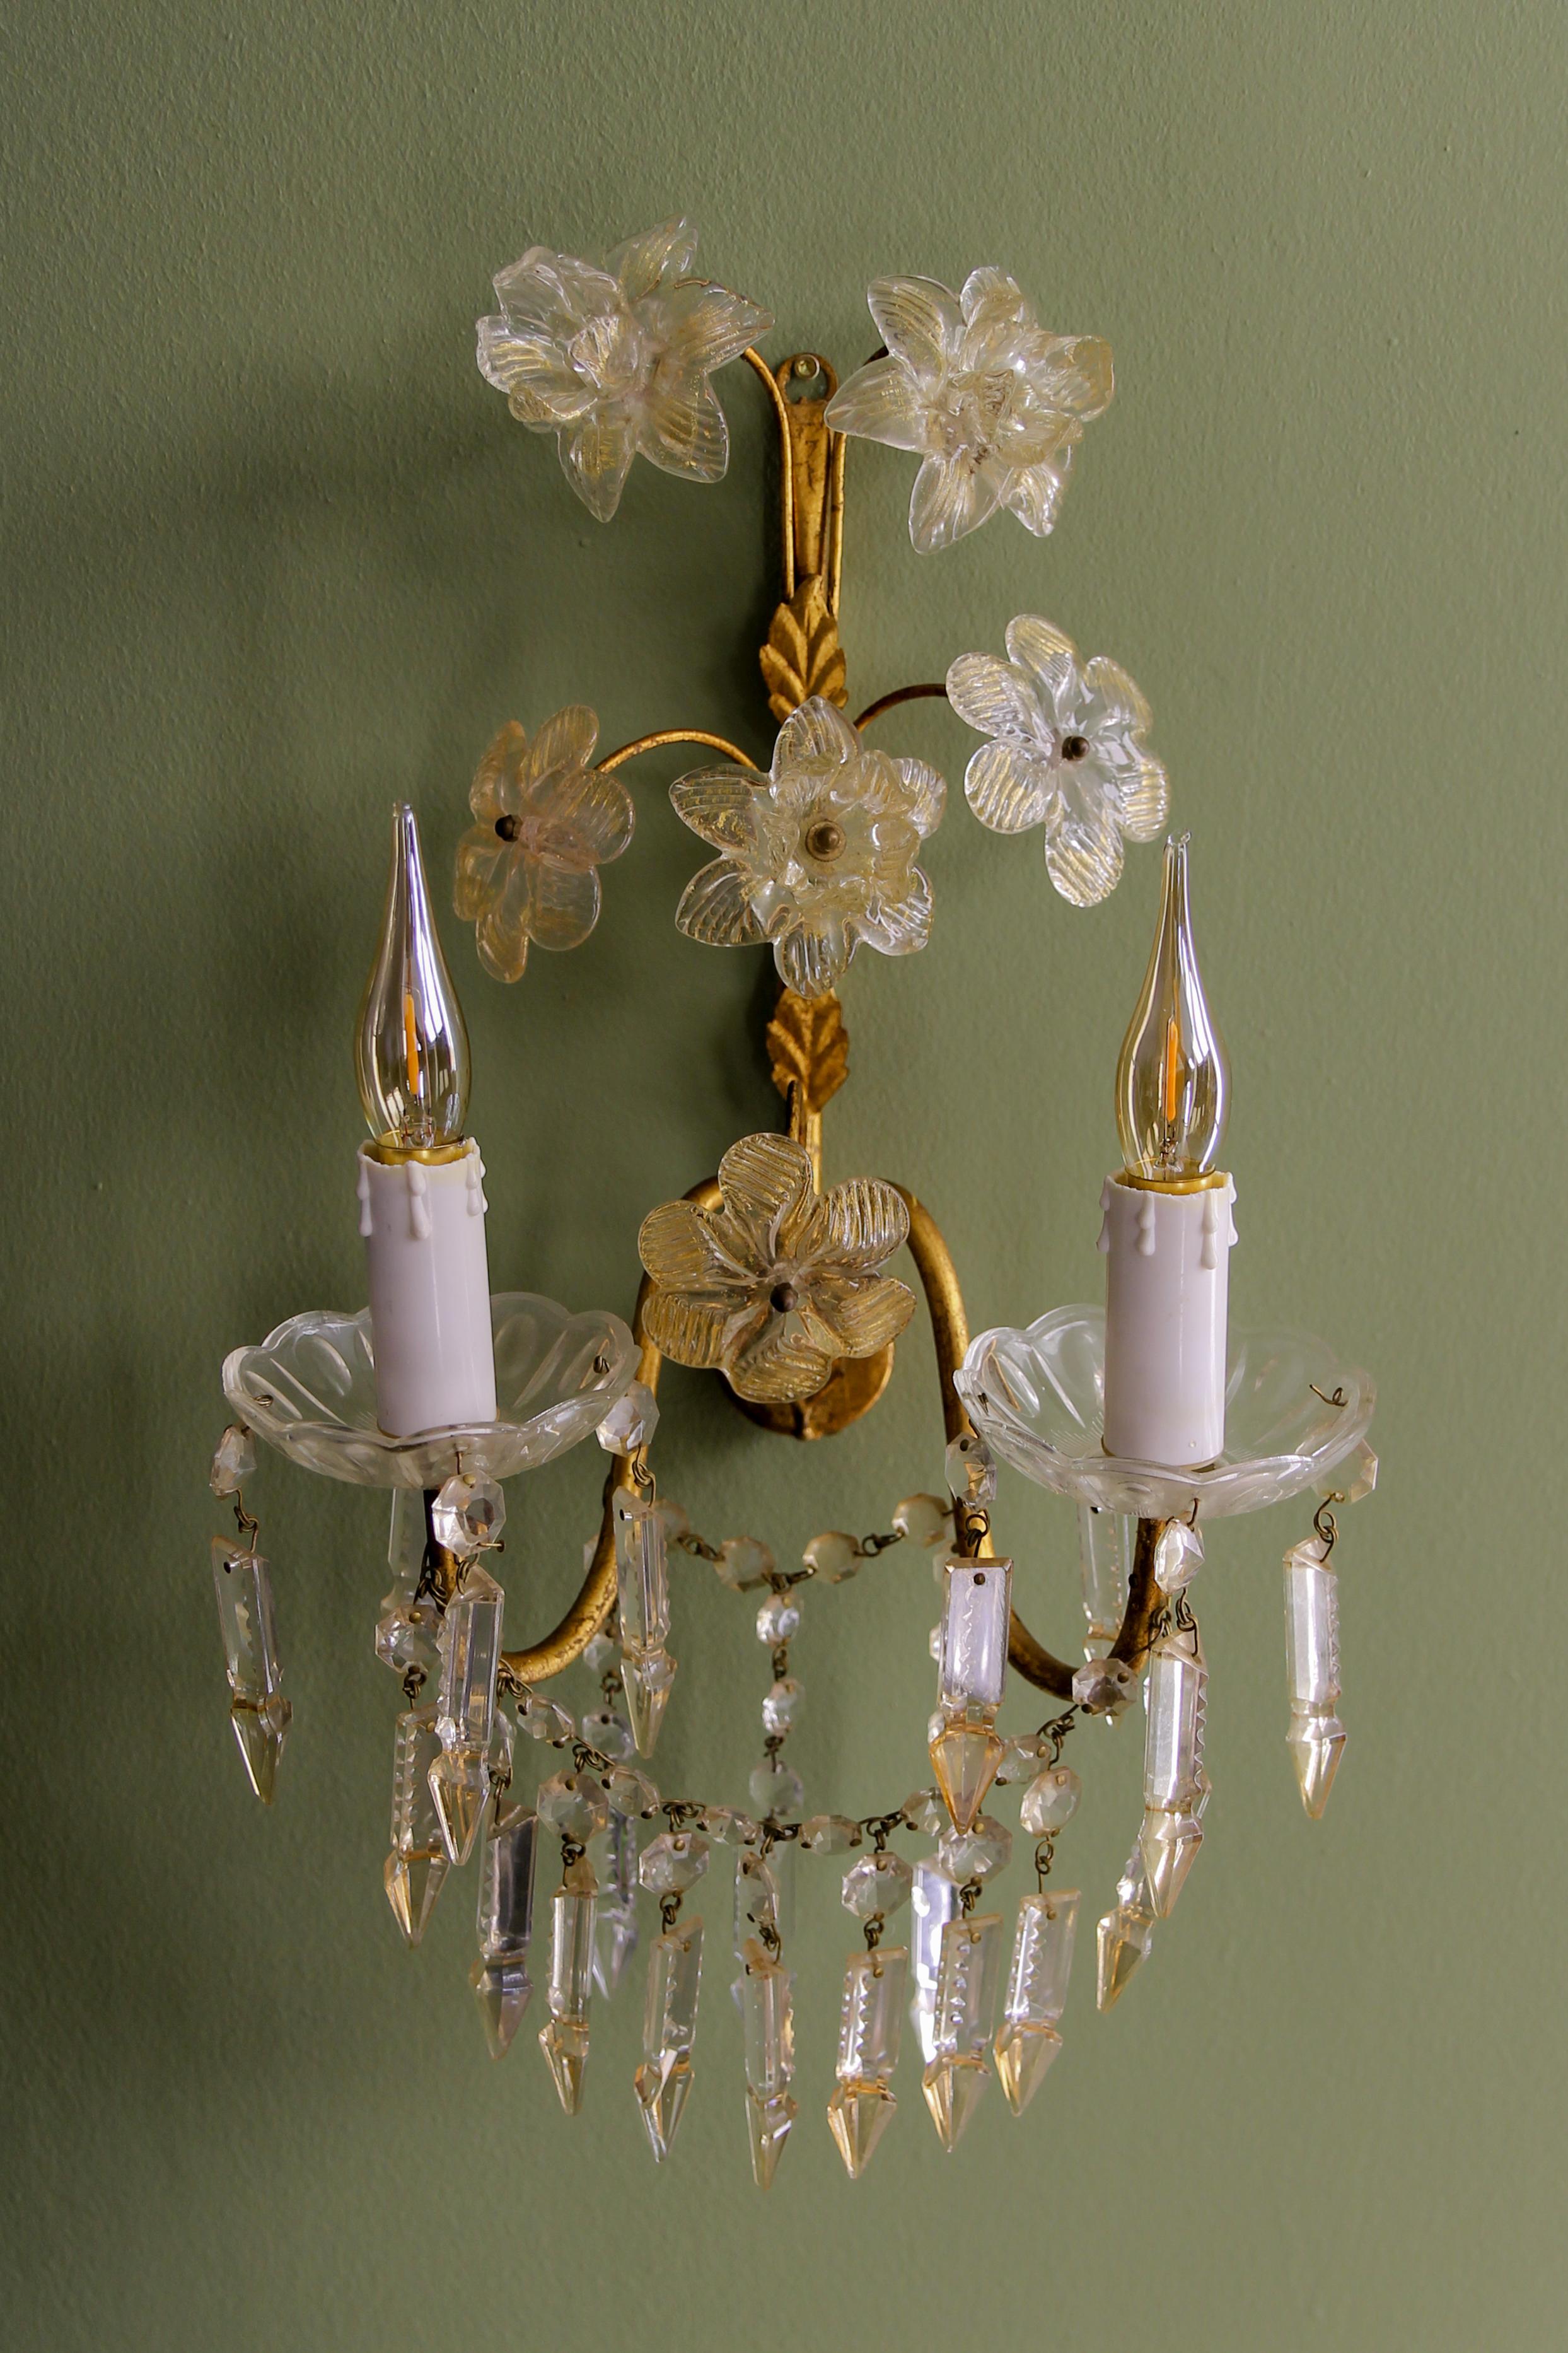 Italian gilt metal two-light sconce with crystal glass flowers and prisms, circa the 1970s.
This beautiful wall lamp features a gilt metal frame with leaves and two arms, each with a glass bobeche and a socket for an E14-size light bulb. This